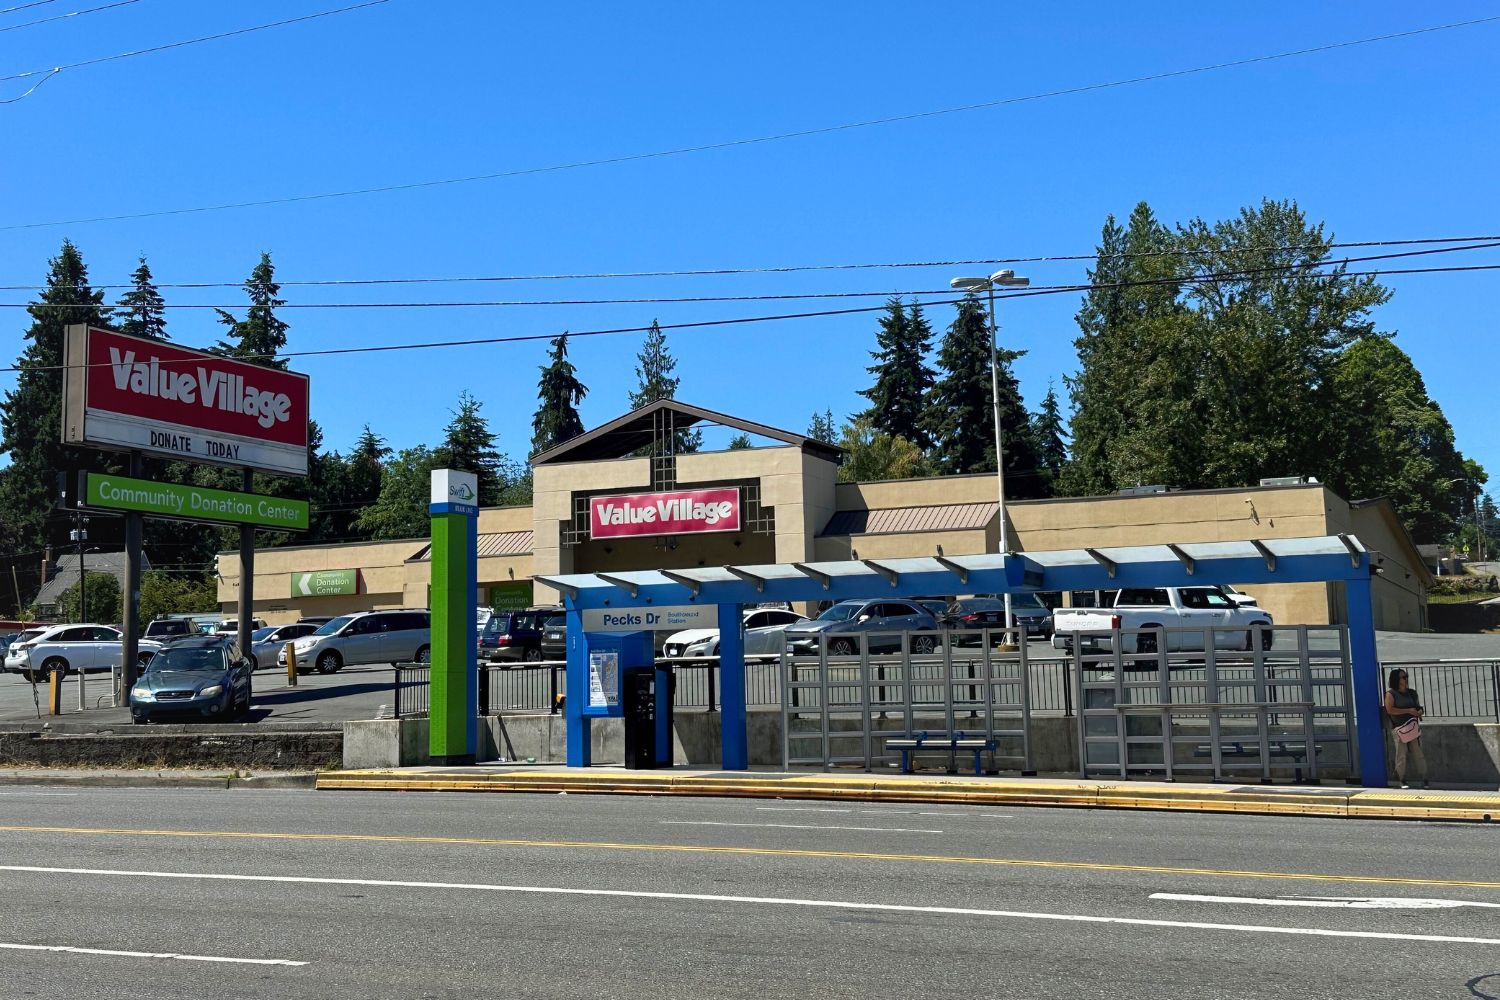 A Swift Station sits in front of a parking lot for a Value Village thrift store in Everett, WA.